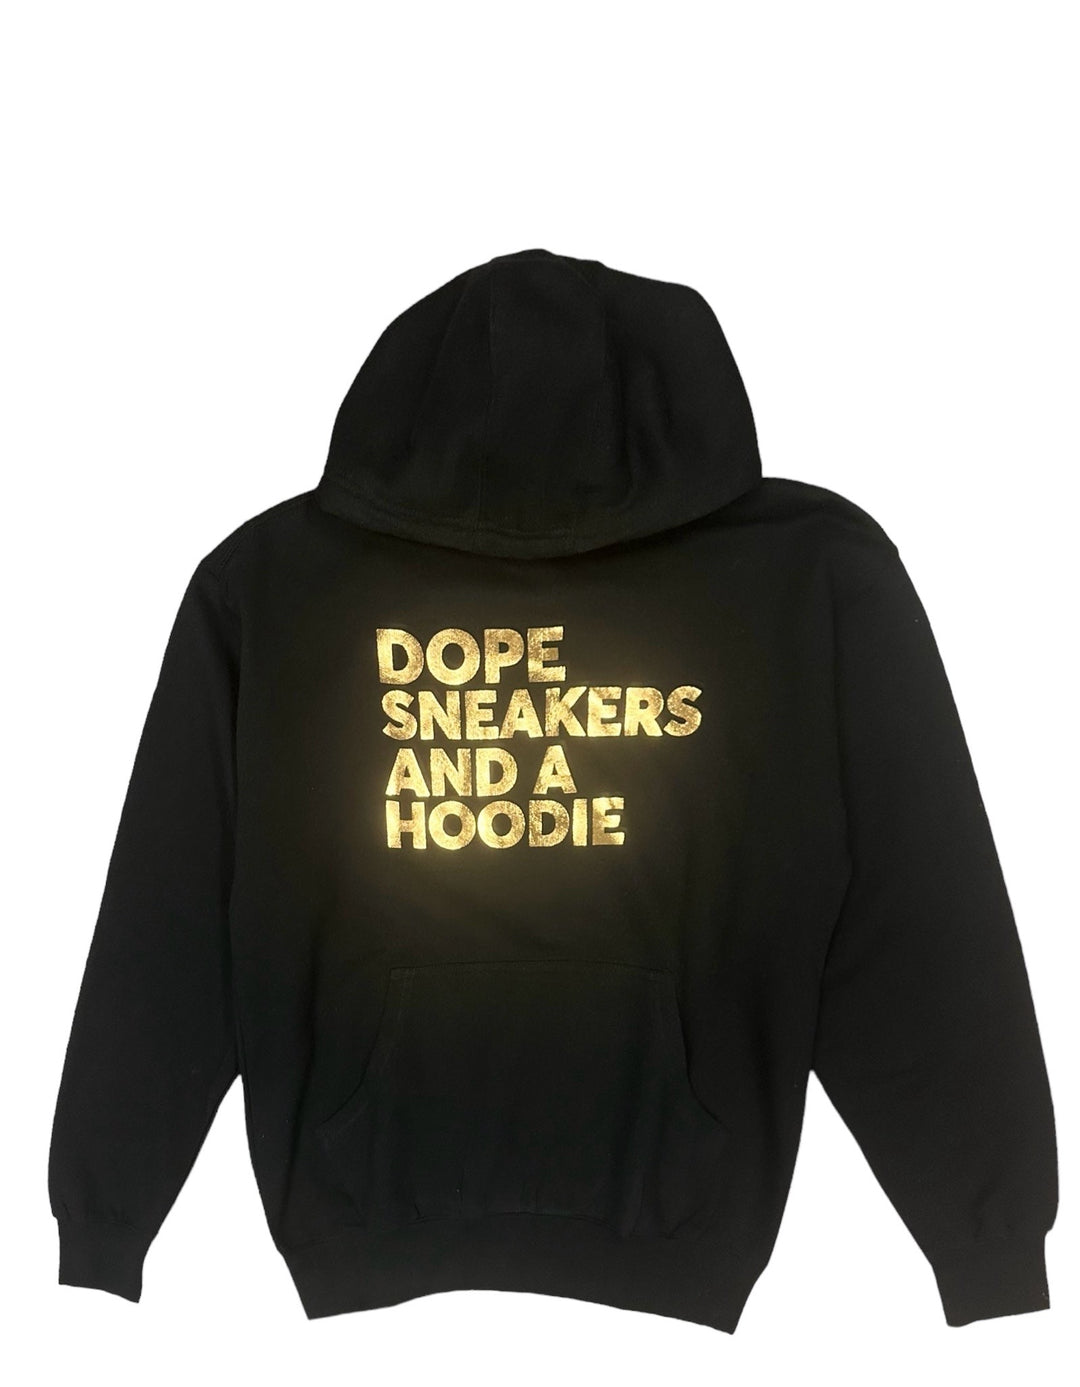 Dope Sneakers and a Hoodie